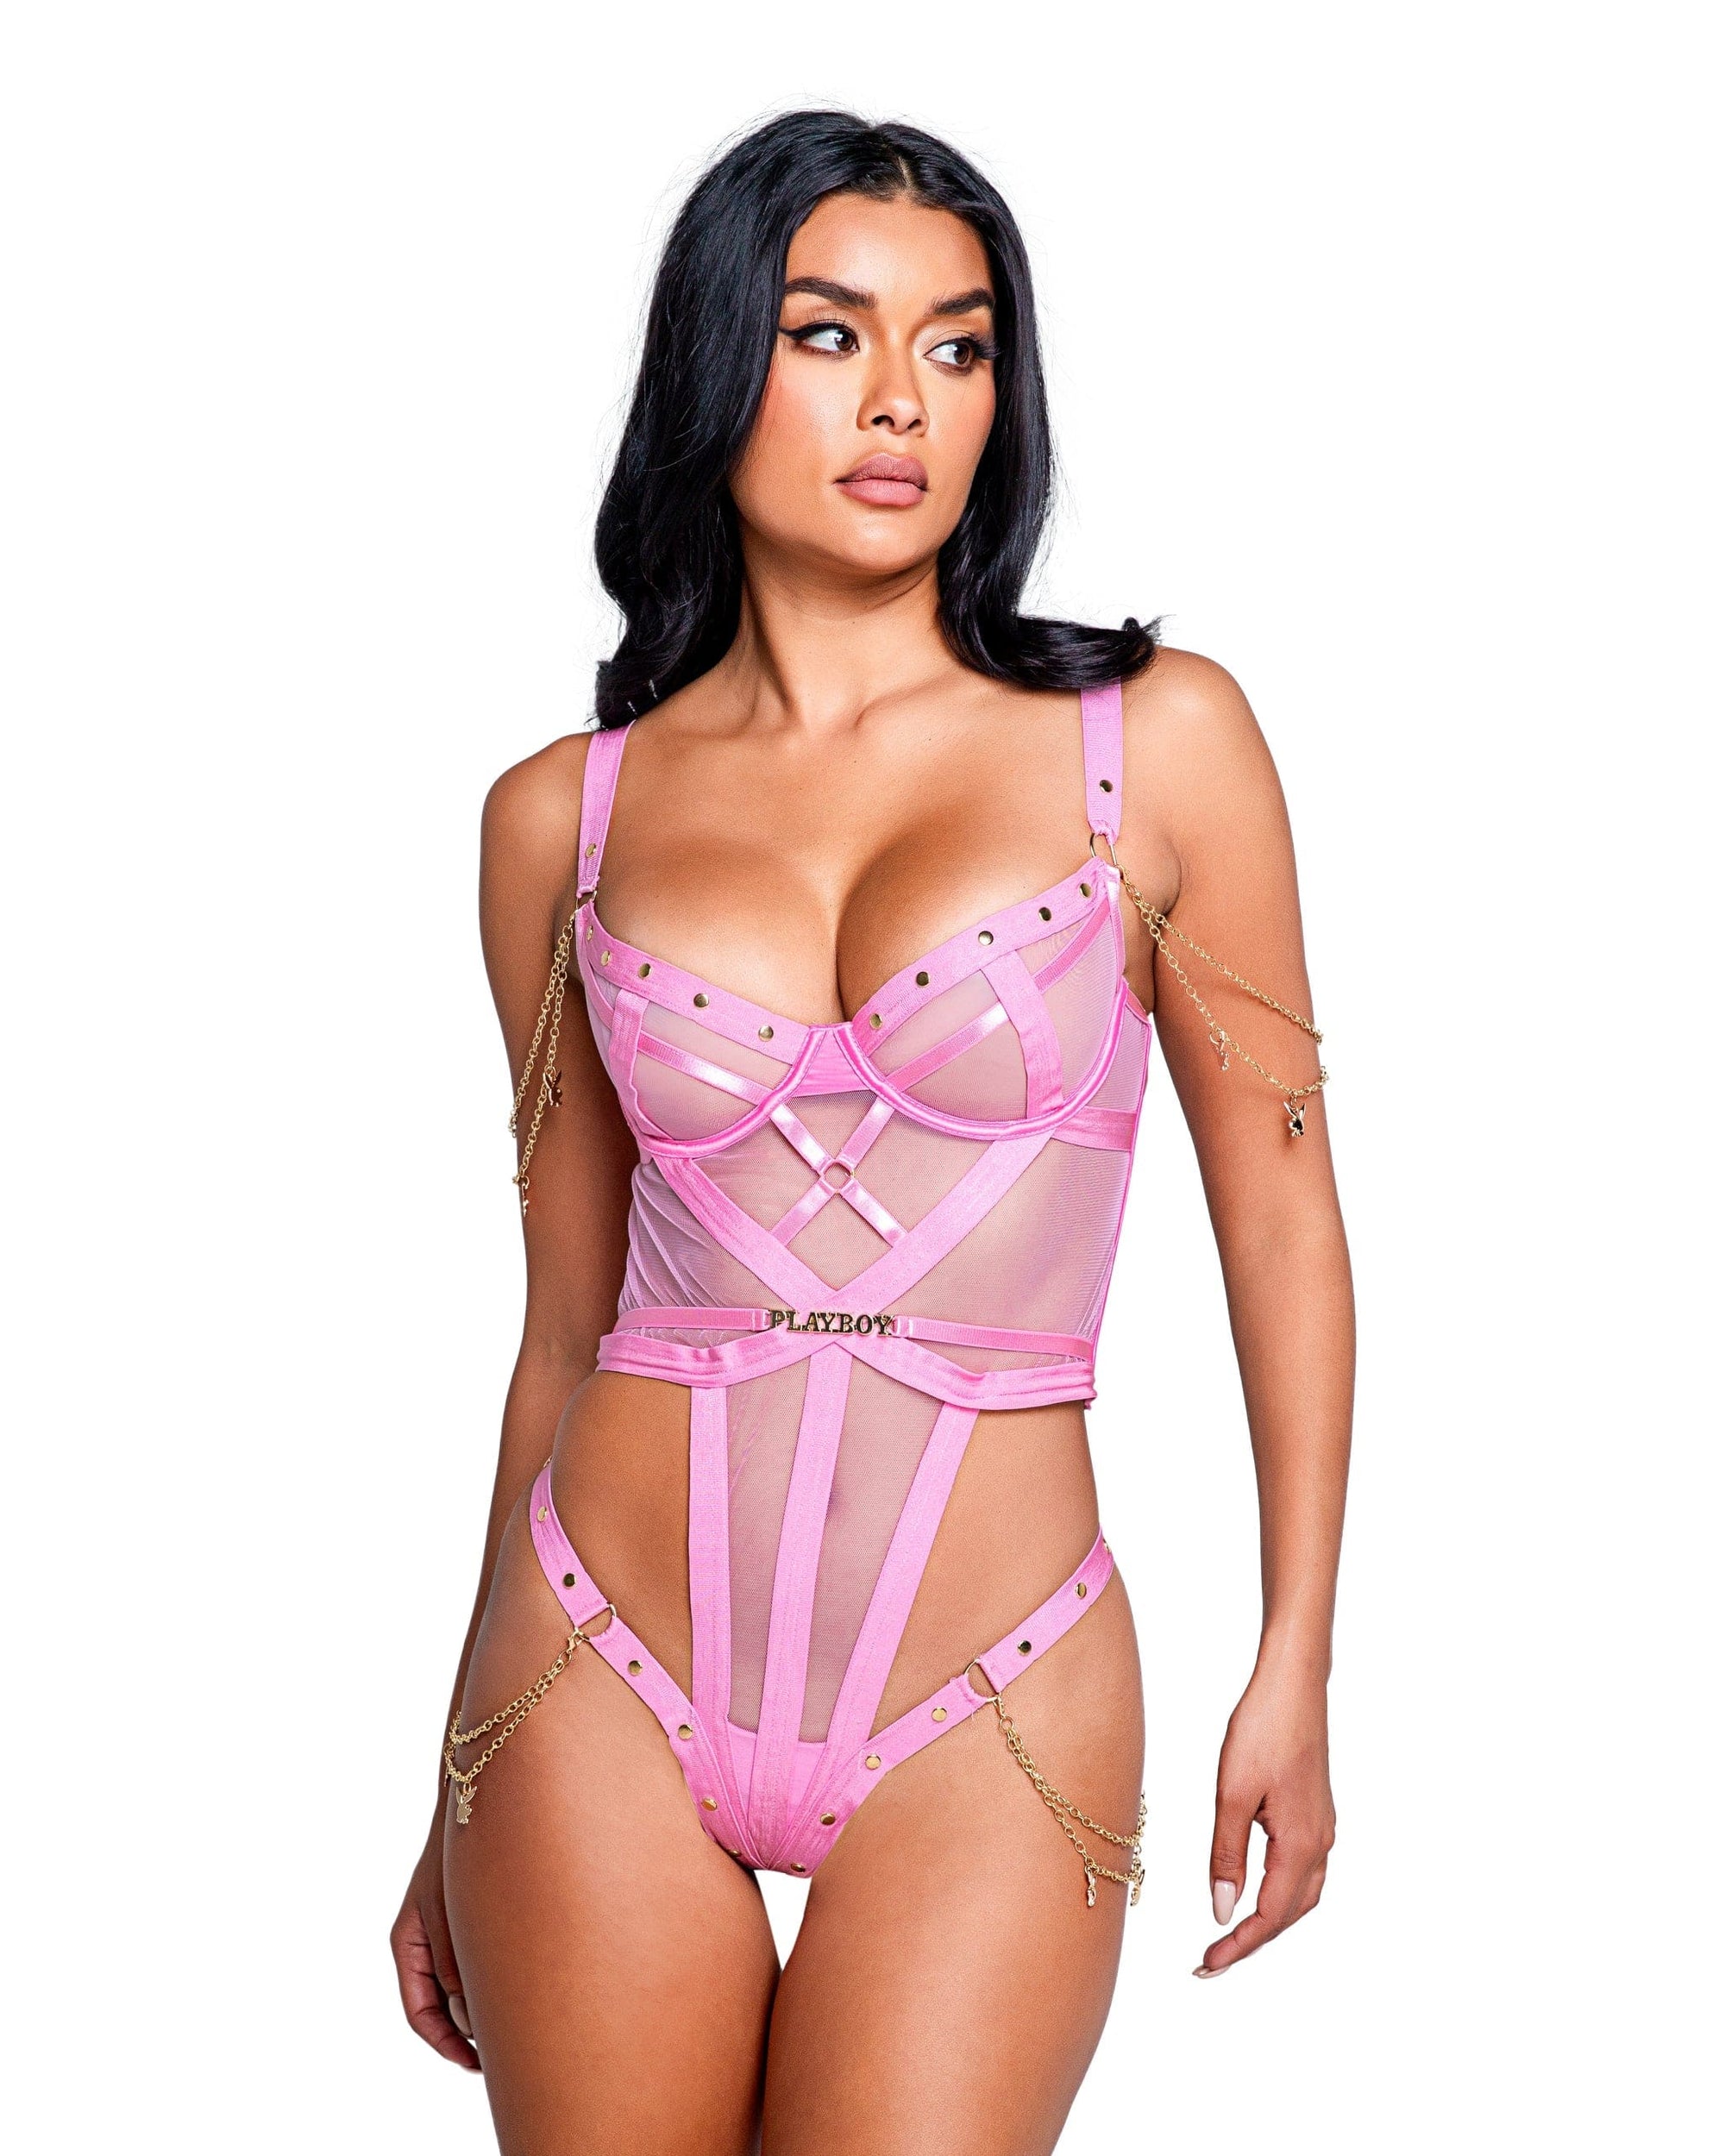 Roma Pink / Small Pink Sheer Mesh Playboy Thong Teddy w/ Logo Chains PBLI124-Pink/Gold-S 2023 Sexy 2 Pc Black Rebel Heart Satin Short Set Lingerie Apparel & Accessories > Clothing > Underwear & Socks > Lingerie